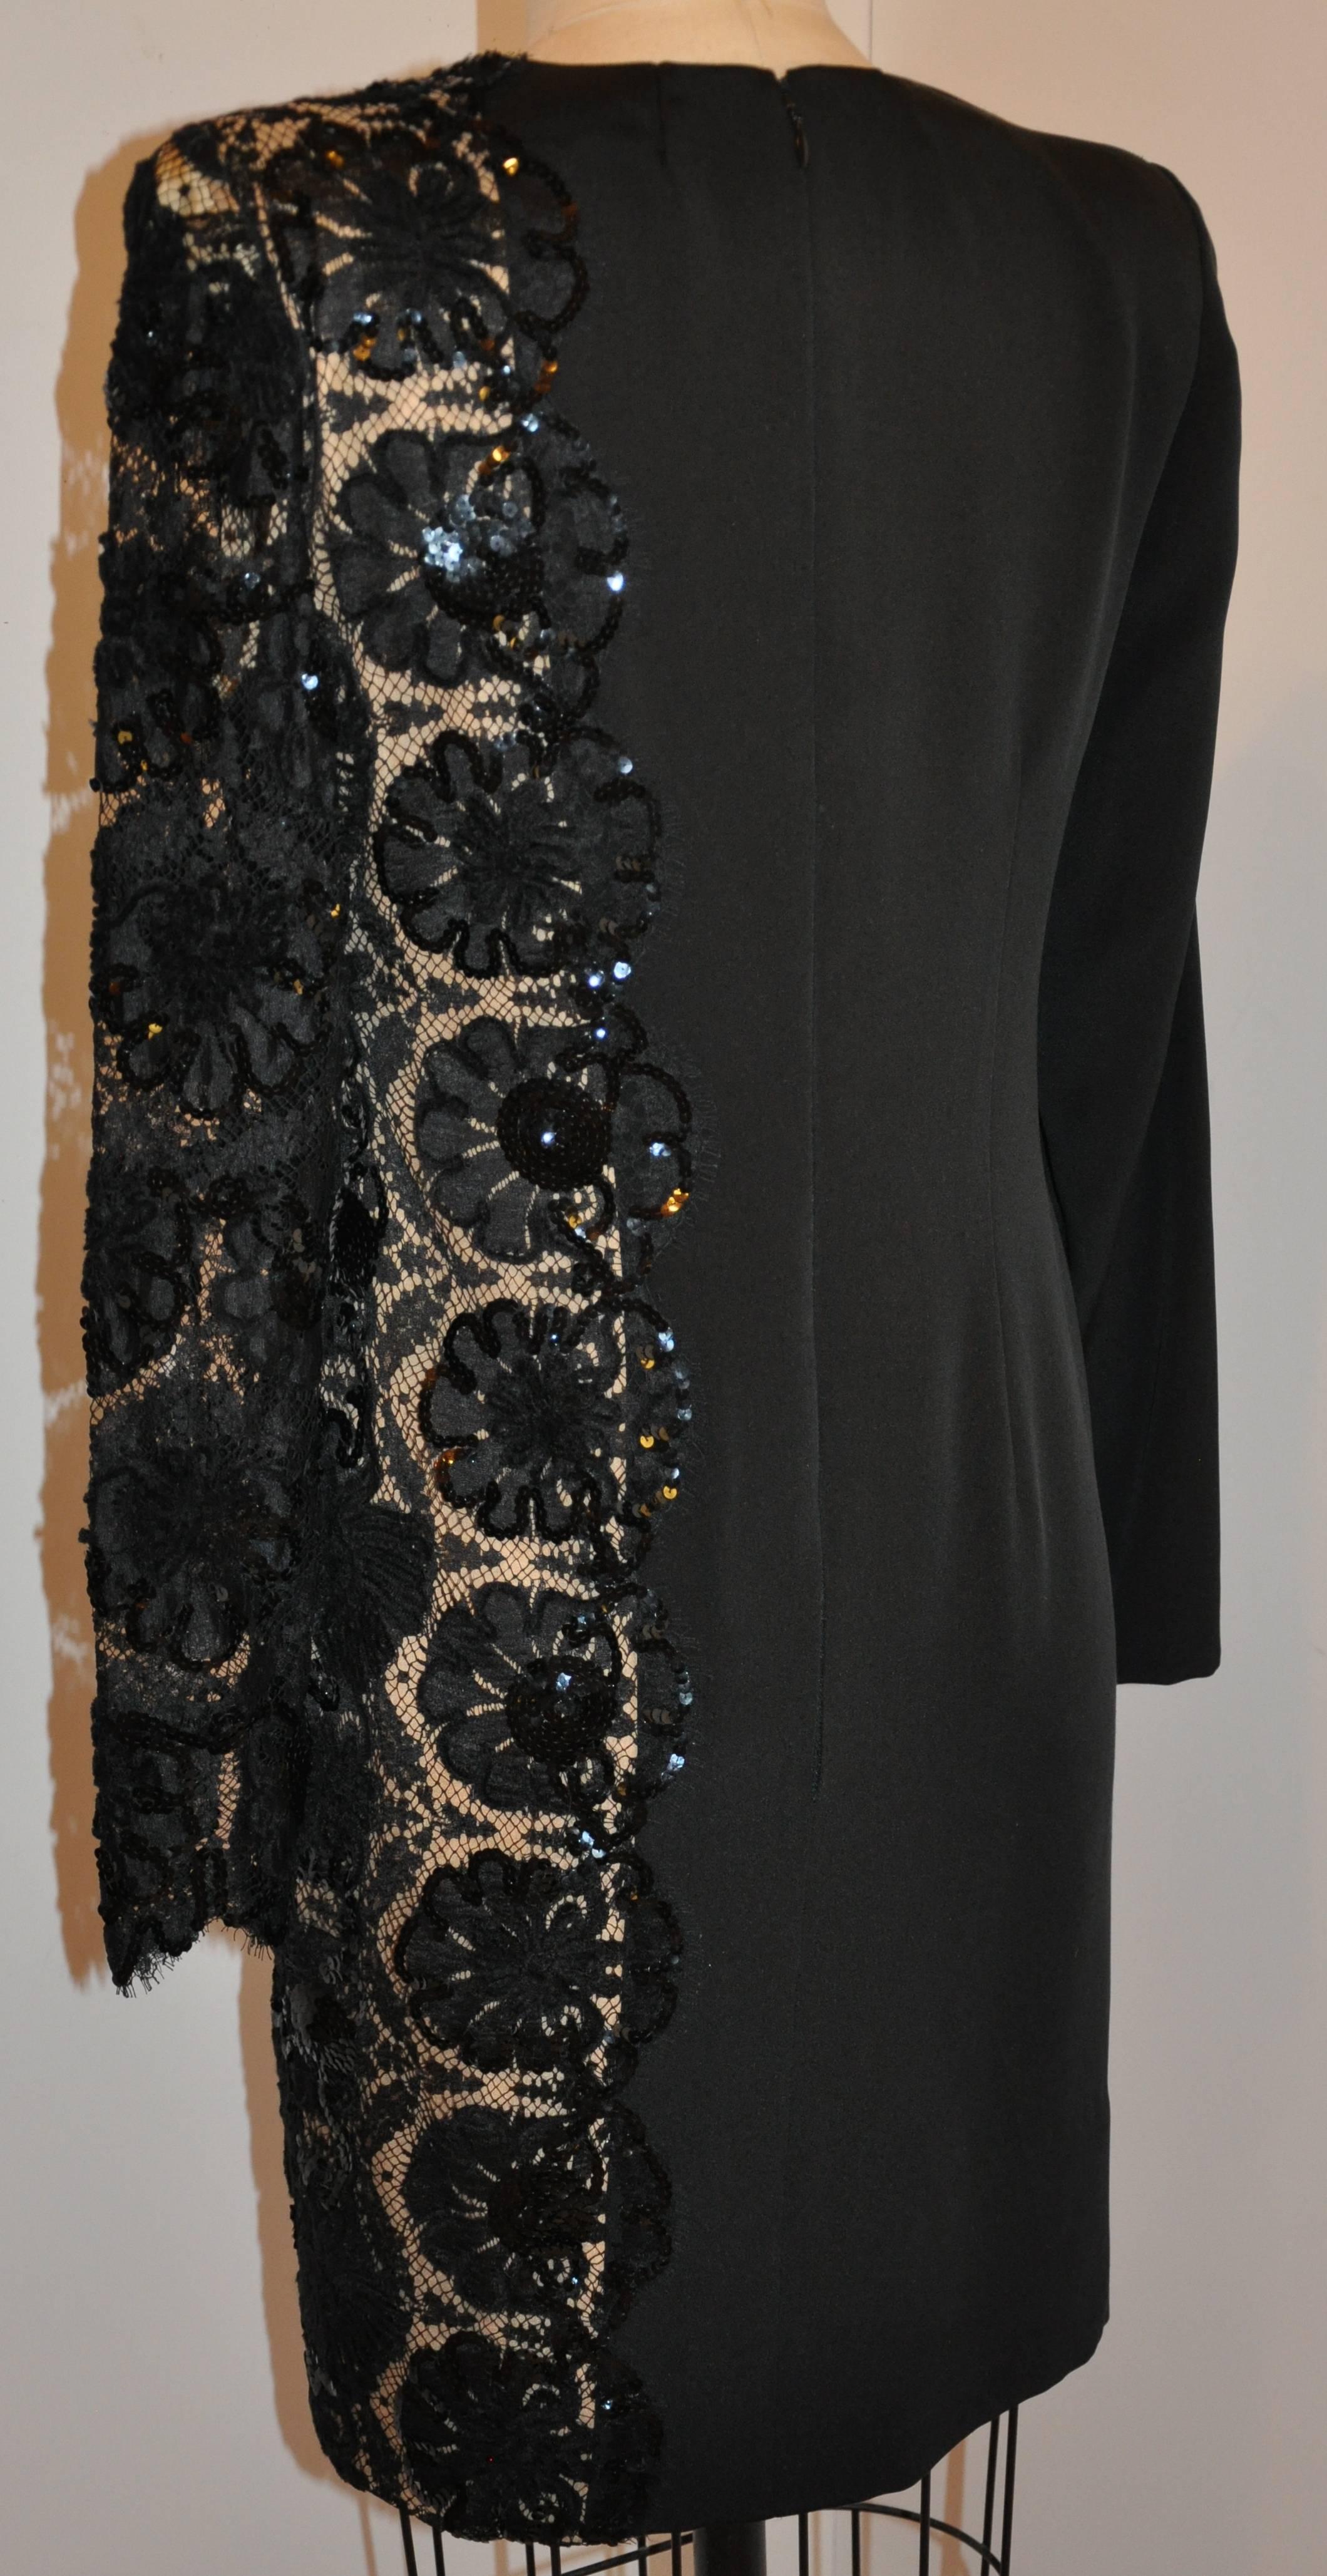        Bill Blass simply beautiful and timeless elegant black silk crepe di chine accented with detailed French lace accented with micro black sequin evening cocktail dress is fully lined with black silk as well. The center back invisible zipper